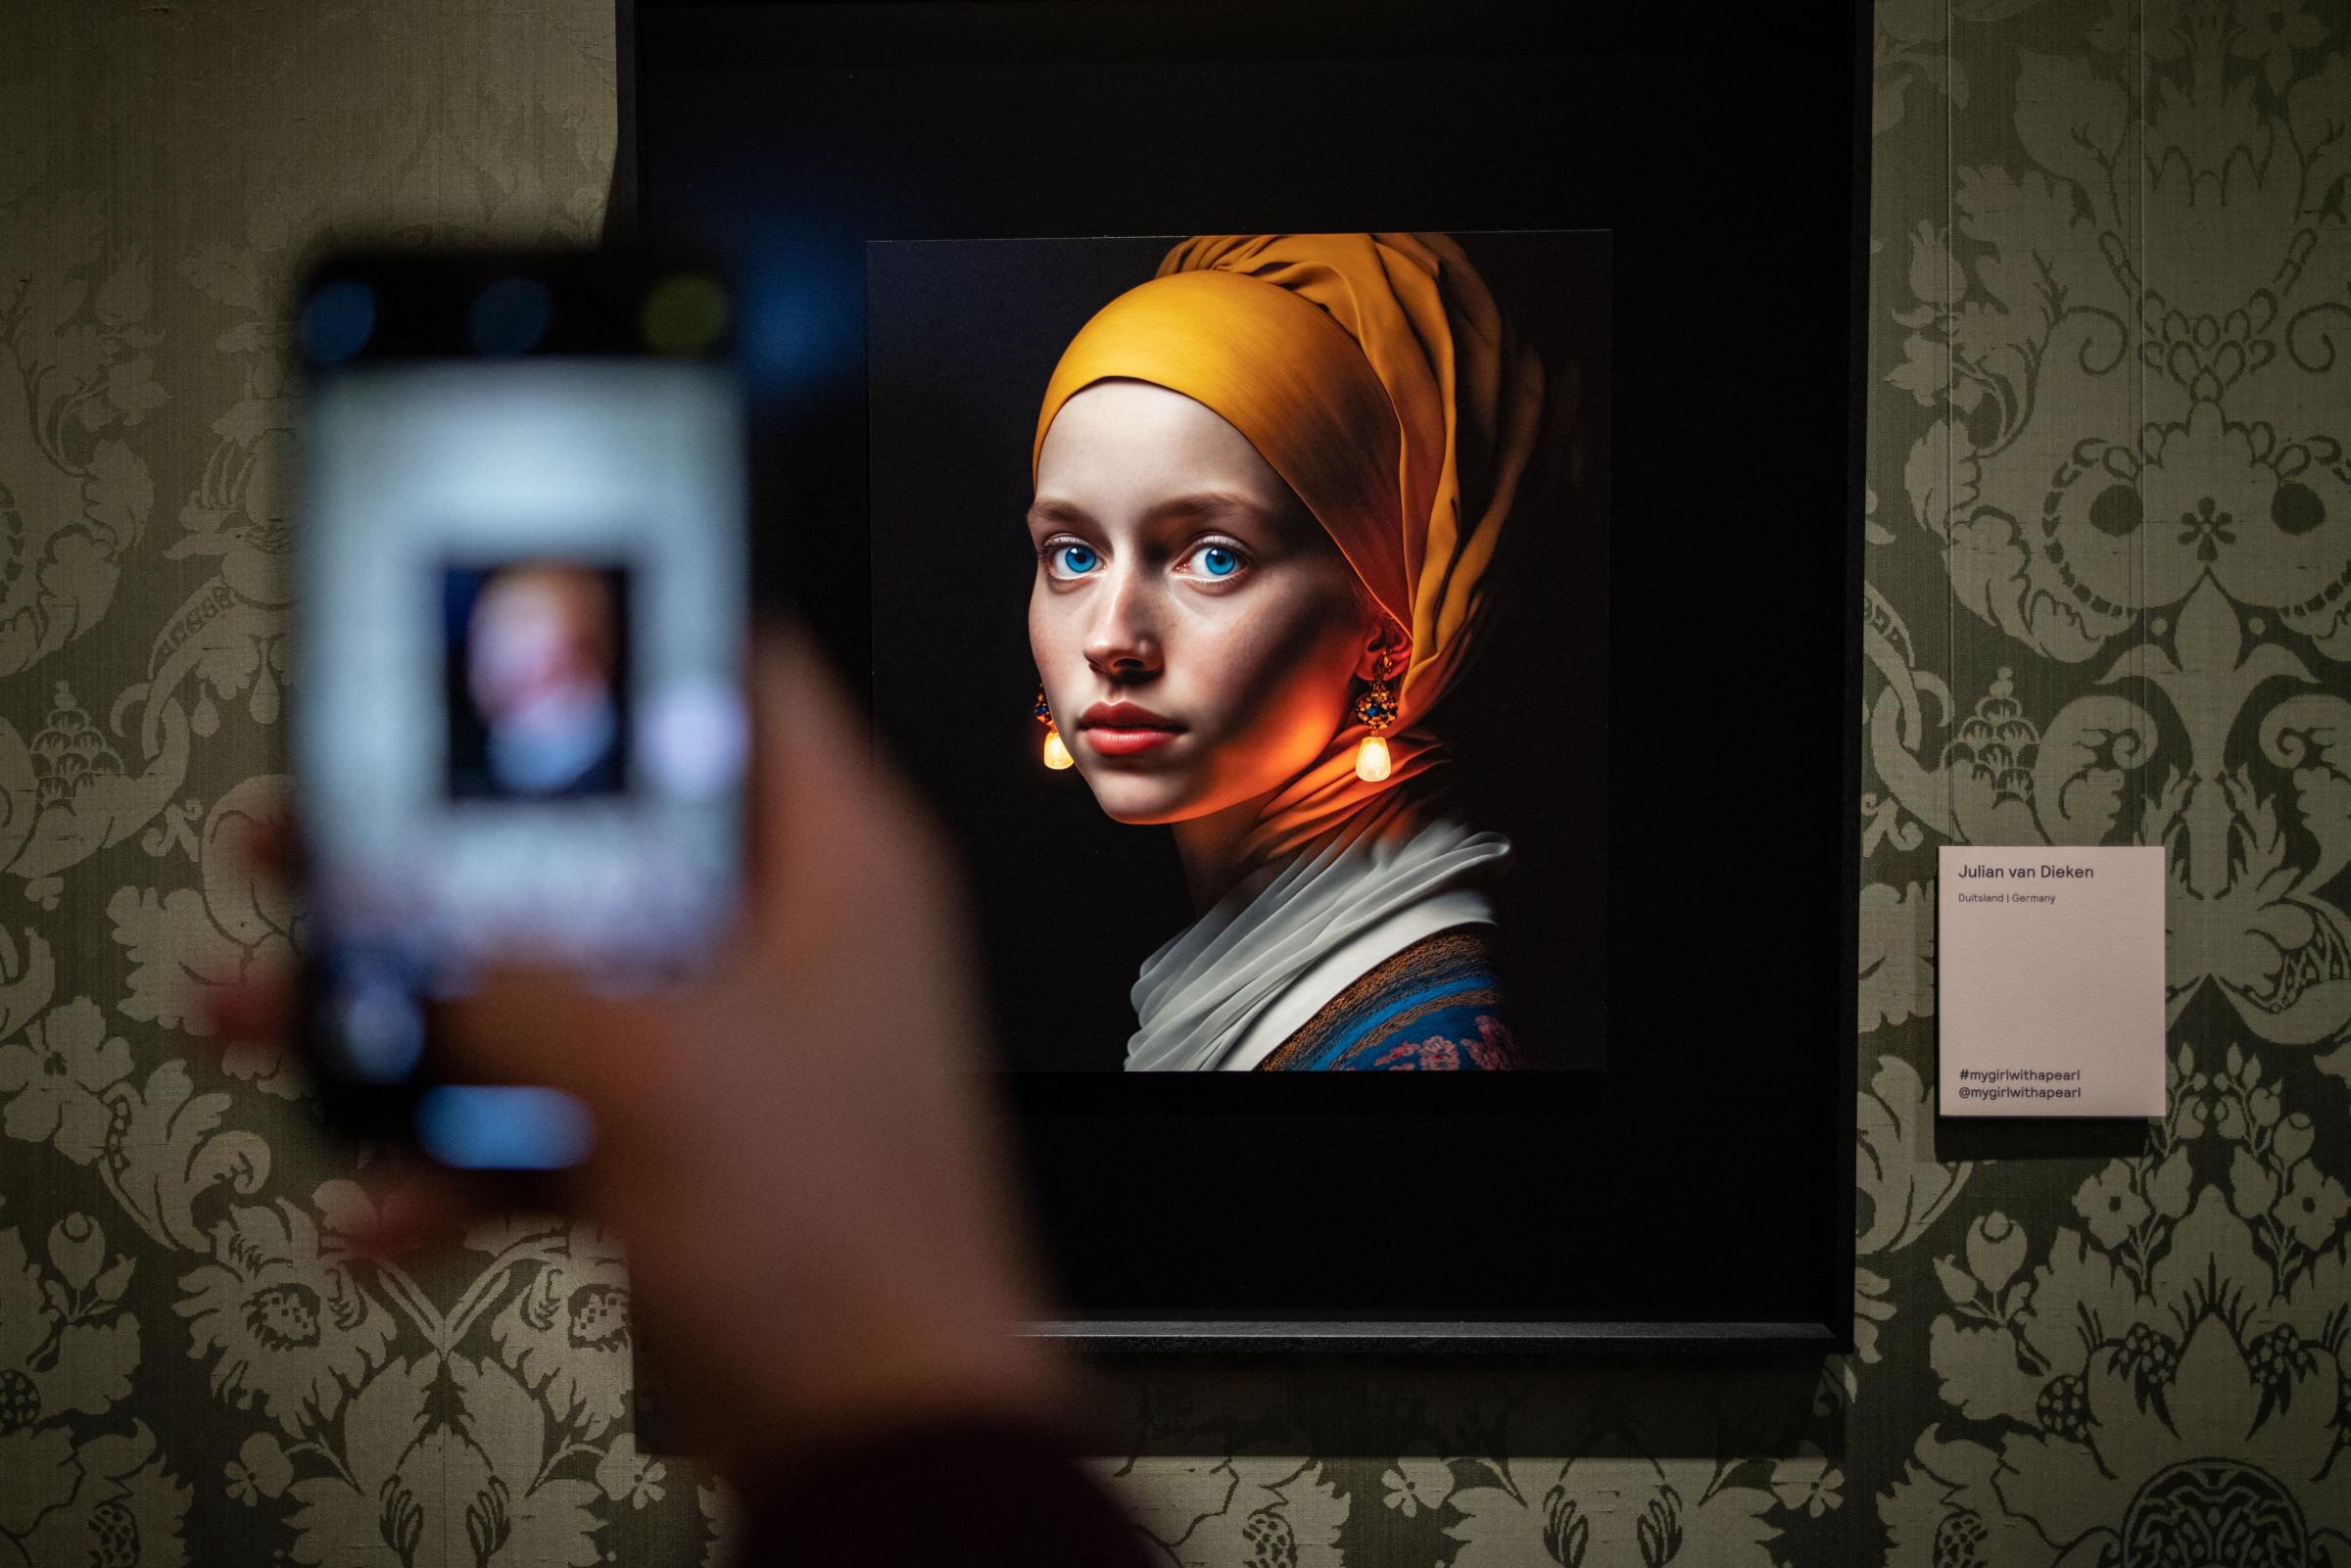 A visitor takes a picture with his mobile phone of an image designed with artificial intelligence by Berlin-based digital creator Julian van Dieken (C) inspired by Johannes Vermeers painting Girl with a Pearl Earring at the Mauritshuis museum in